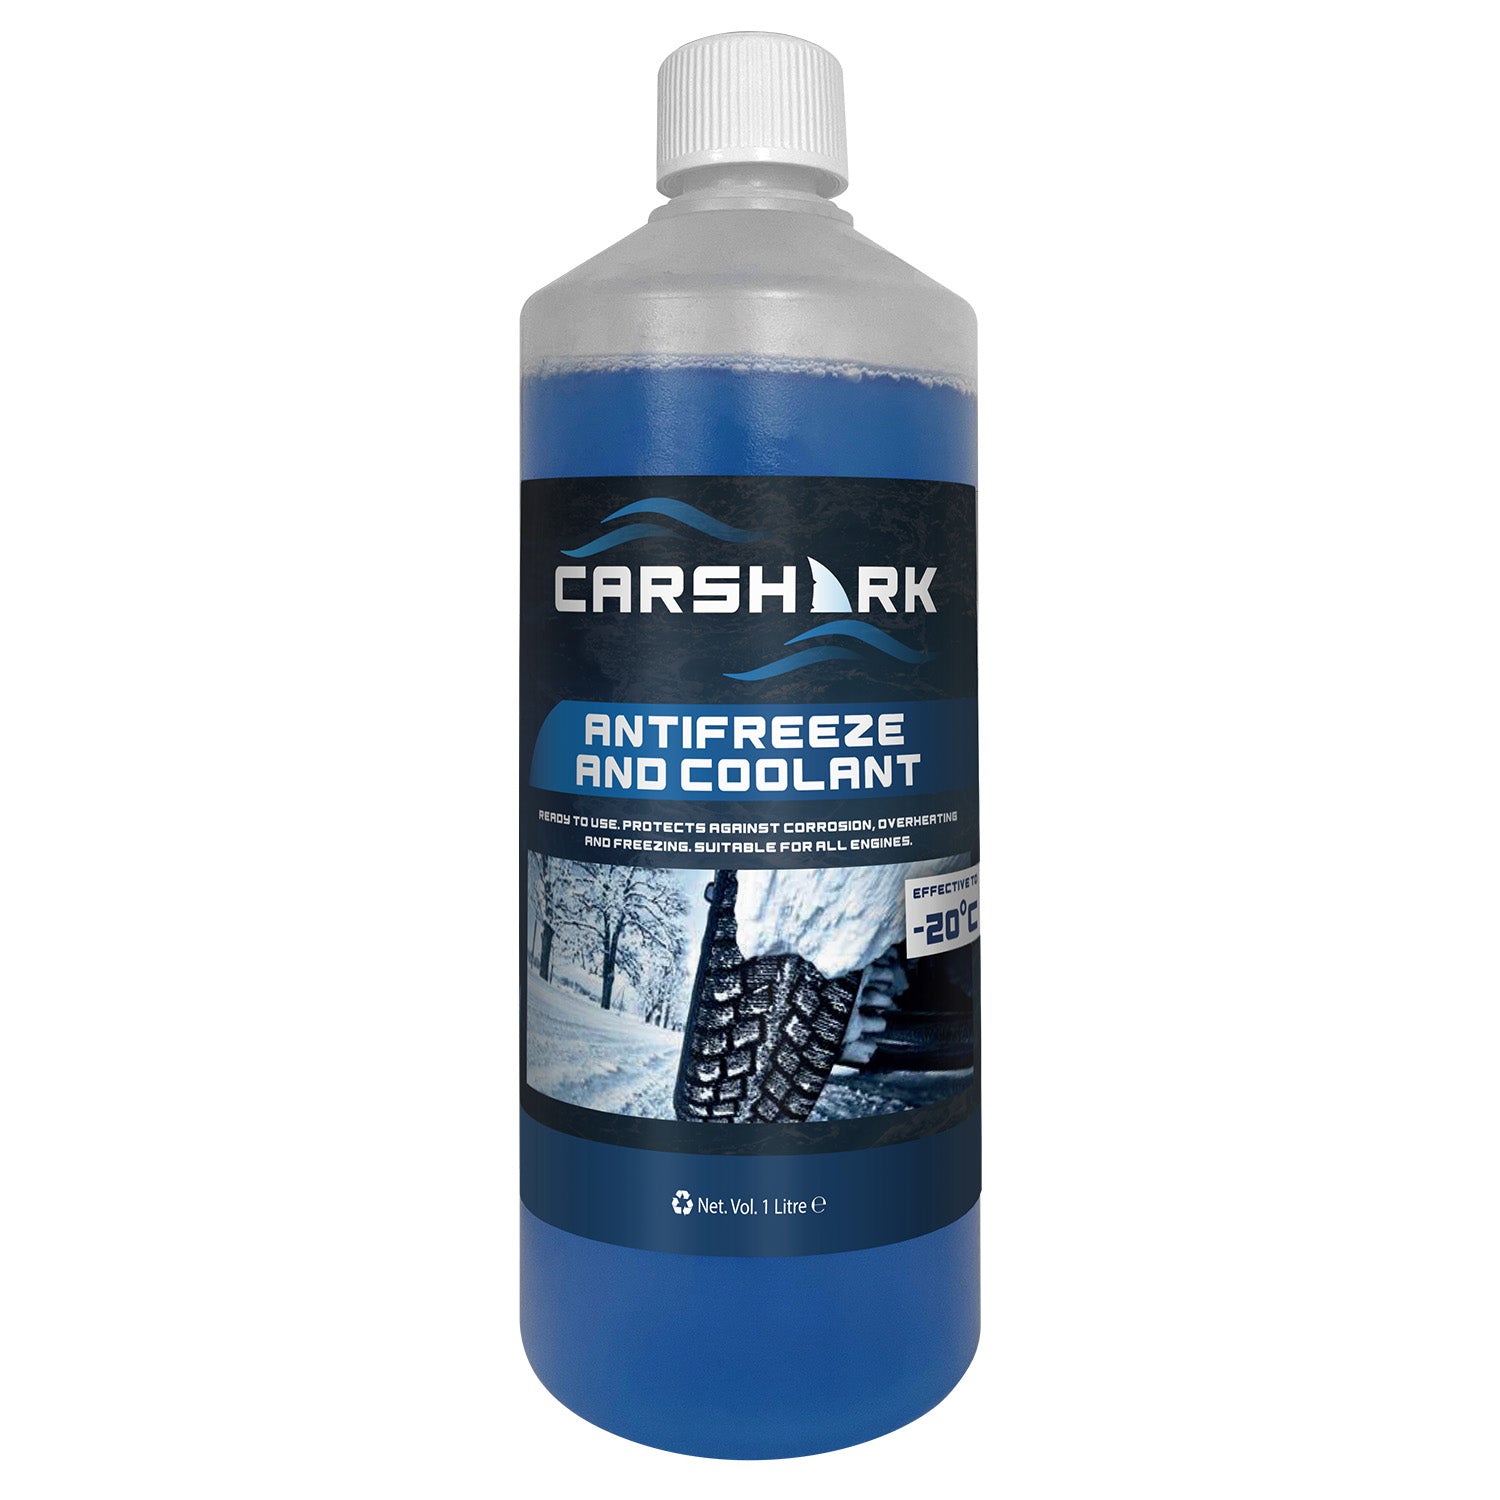 CARSHARK Antifreeze and Coolant 2 x 1 Litre -20°C Ready to use